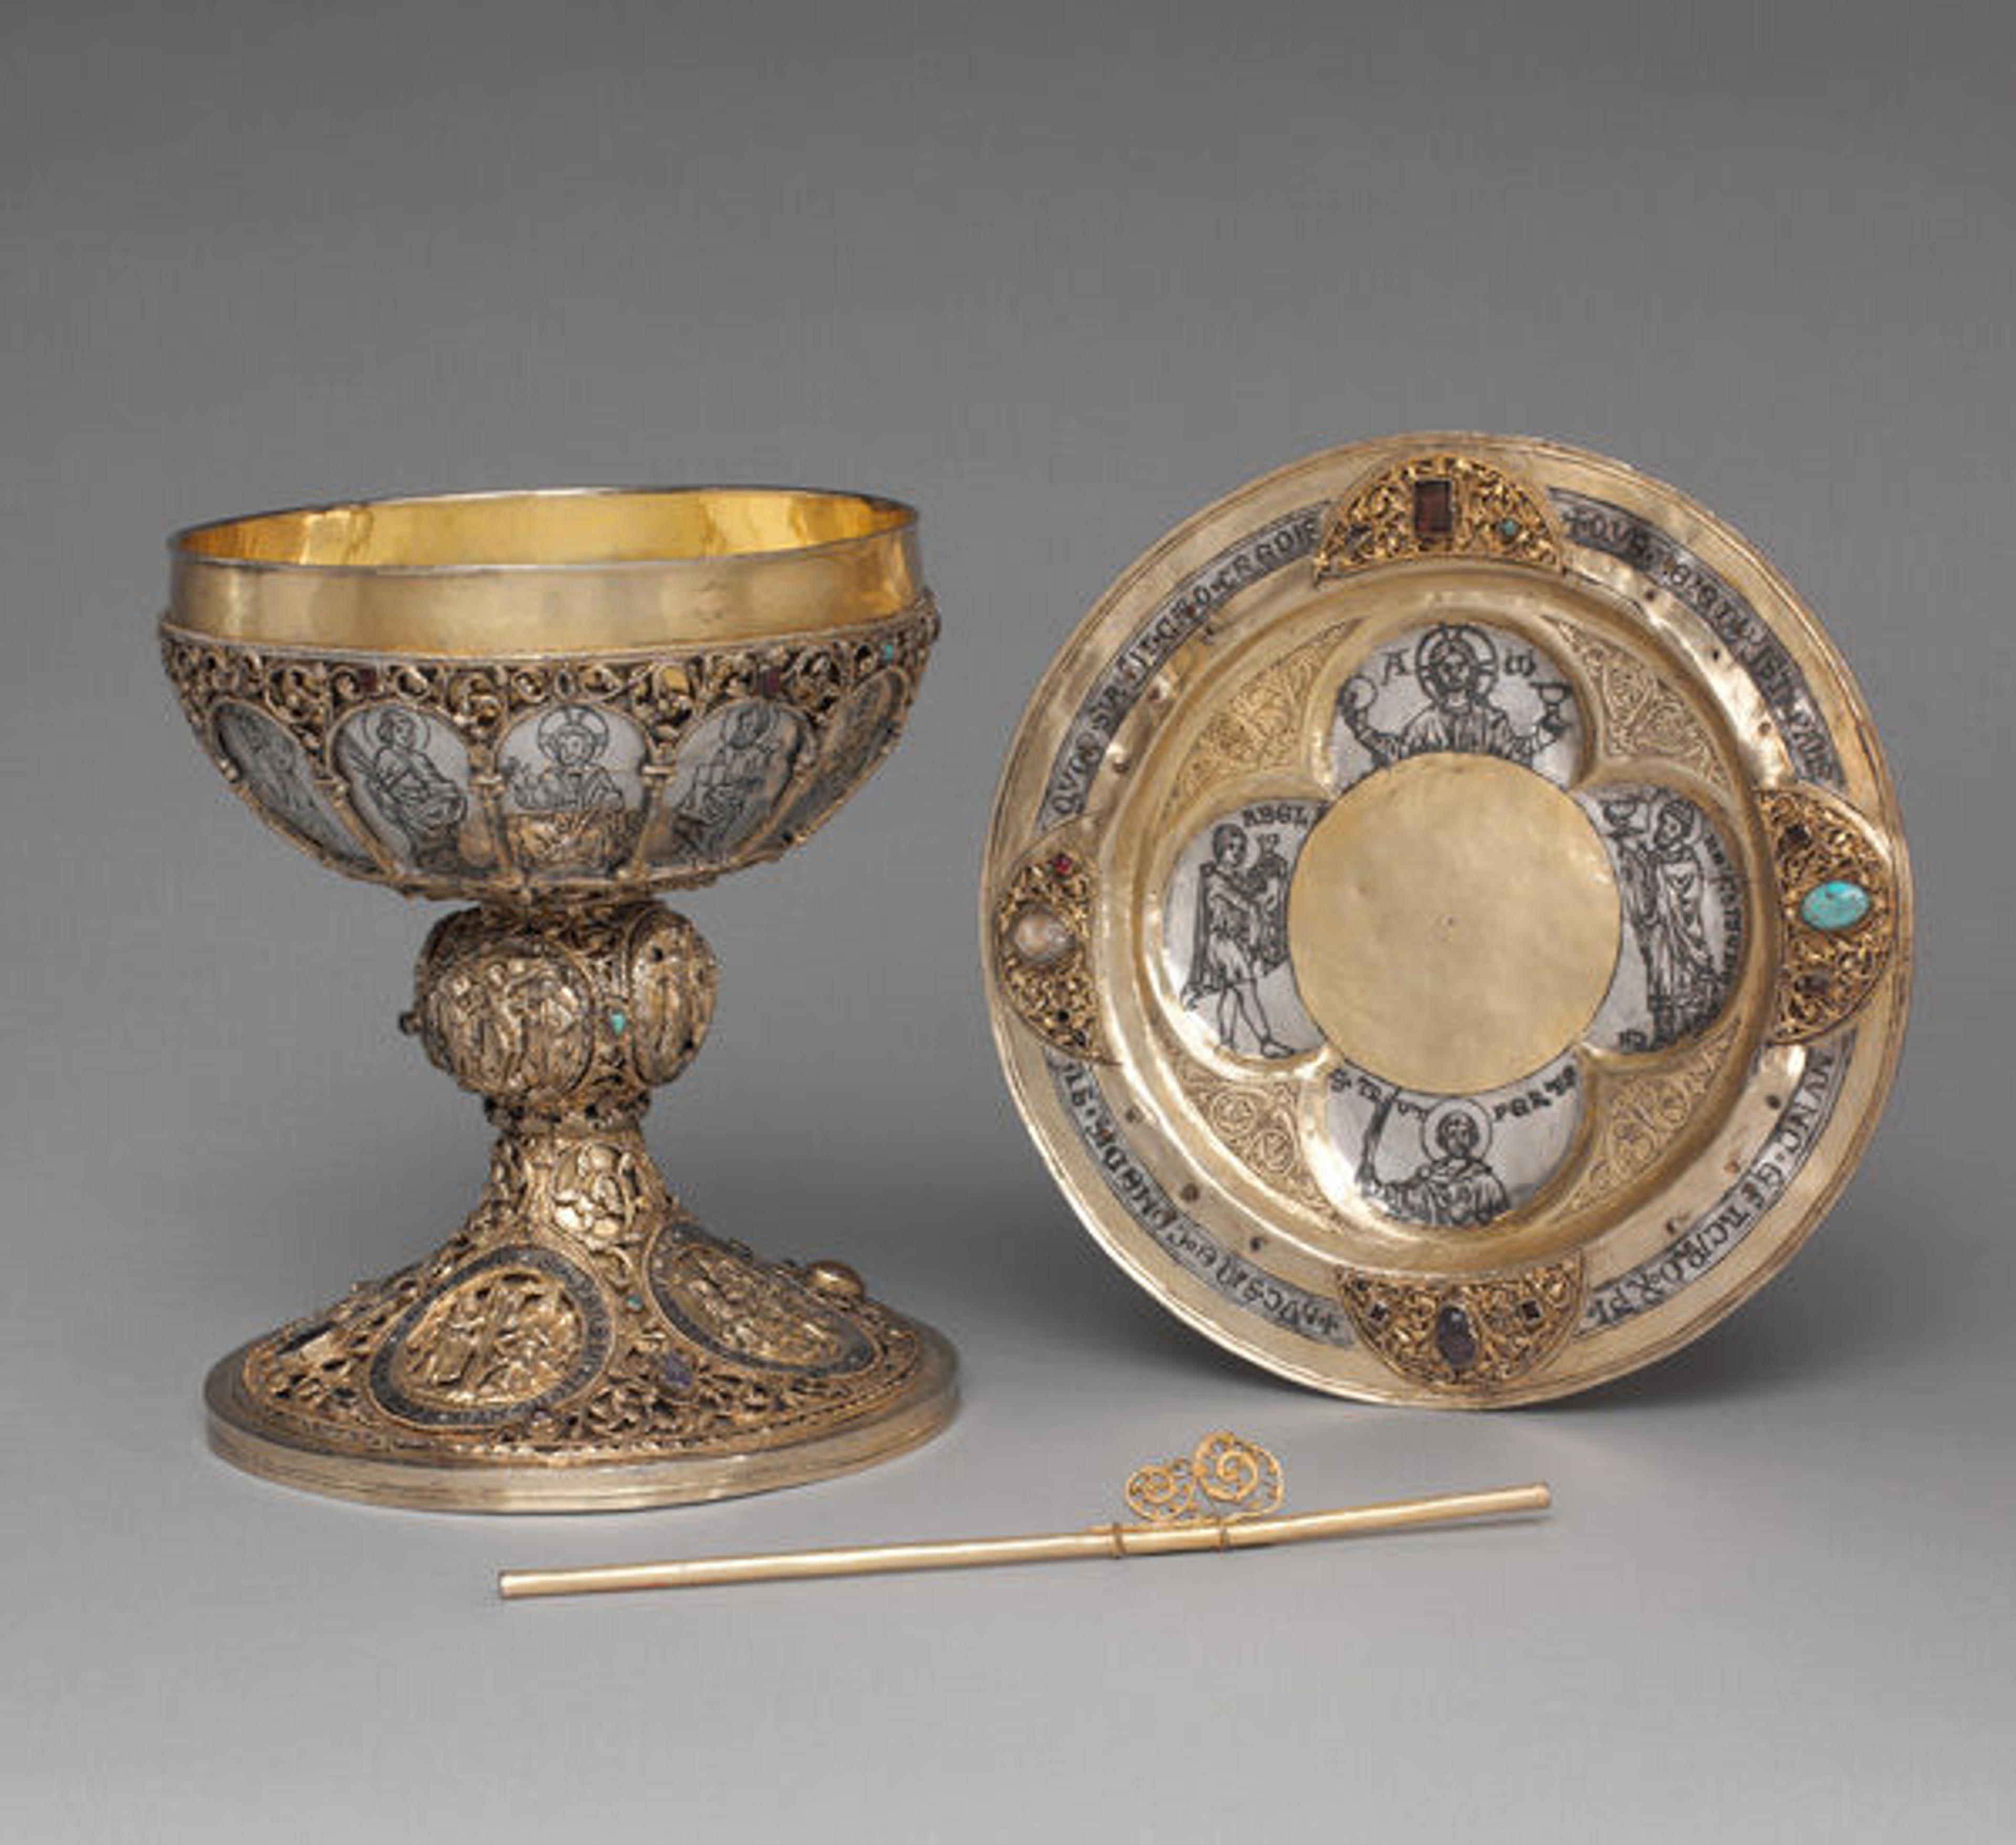 Chalice, Paten, and Straw, ca. 1230–1250. German. Silver, gilded silver, niello, and jewels. The Metropolitan Museum of Art, New York, The Cloisters Collection, 1947 (47.101.26–.28)